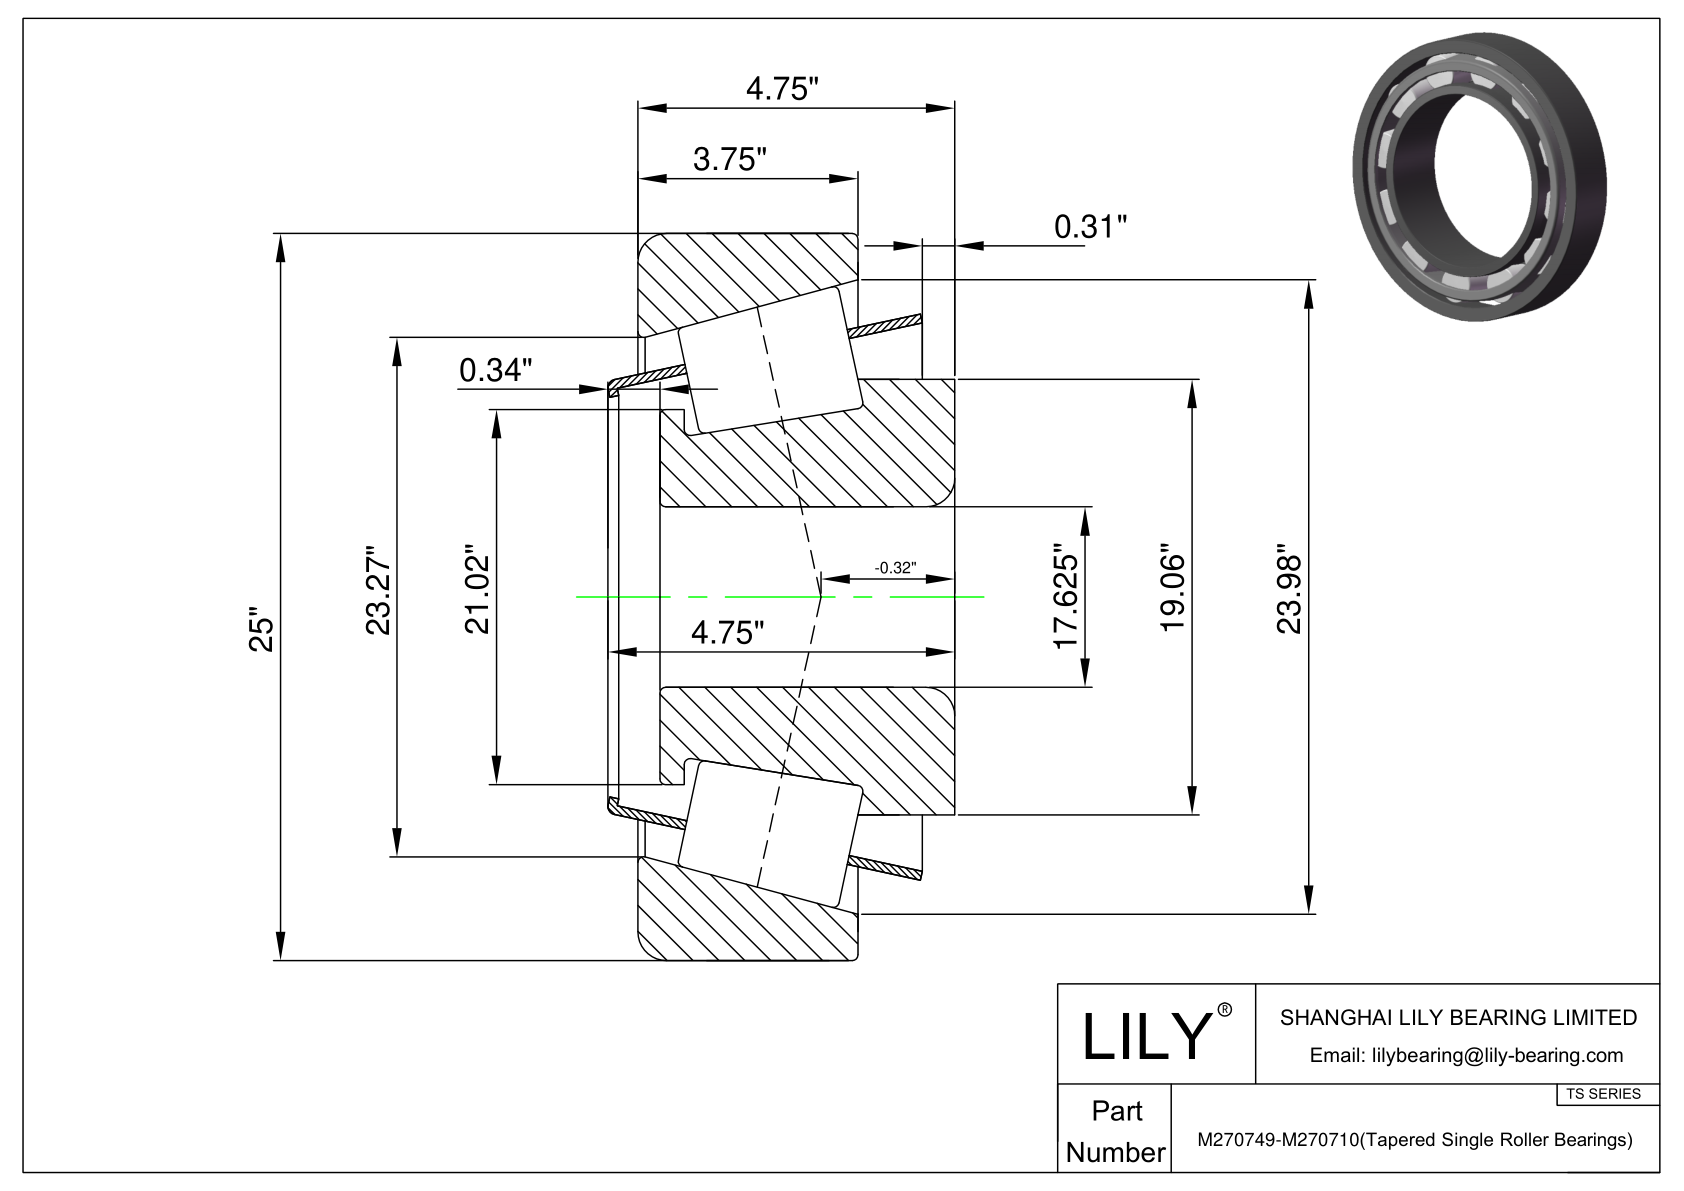 M270749-M270710 TS (Tapered Single Roller Bearings) (Imperial) cad drawing